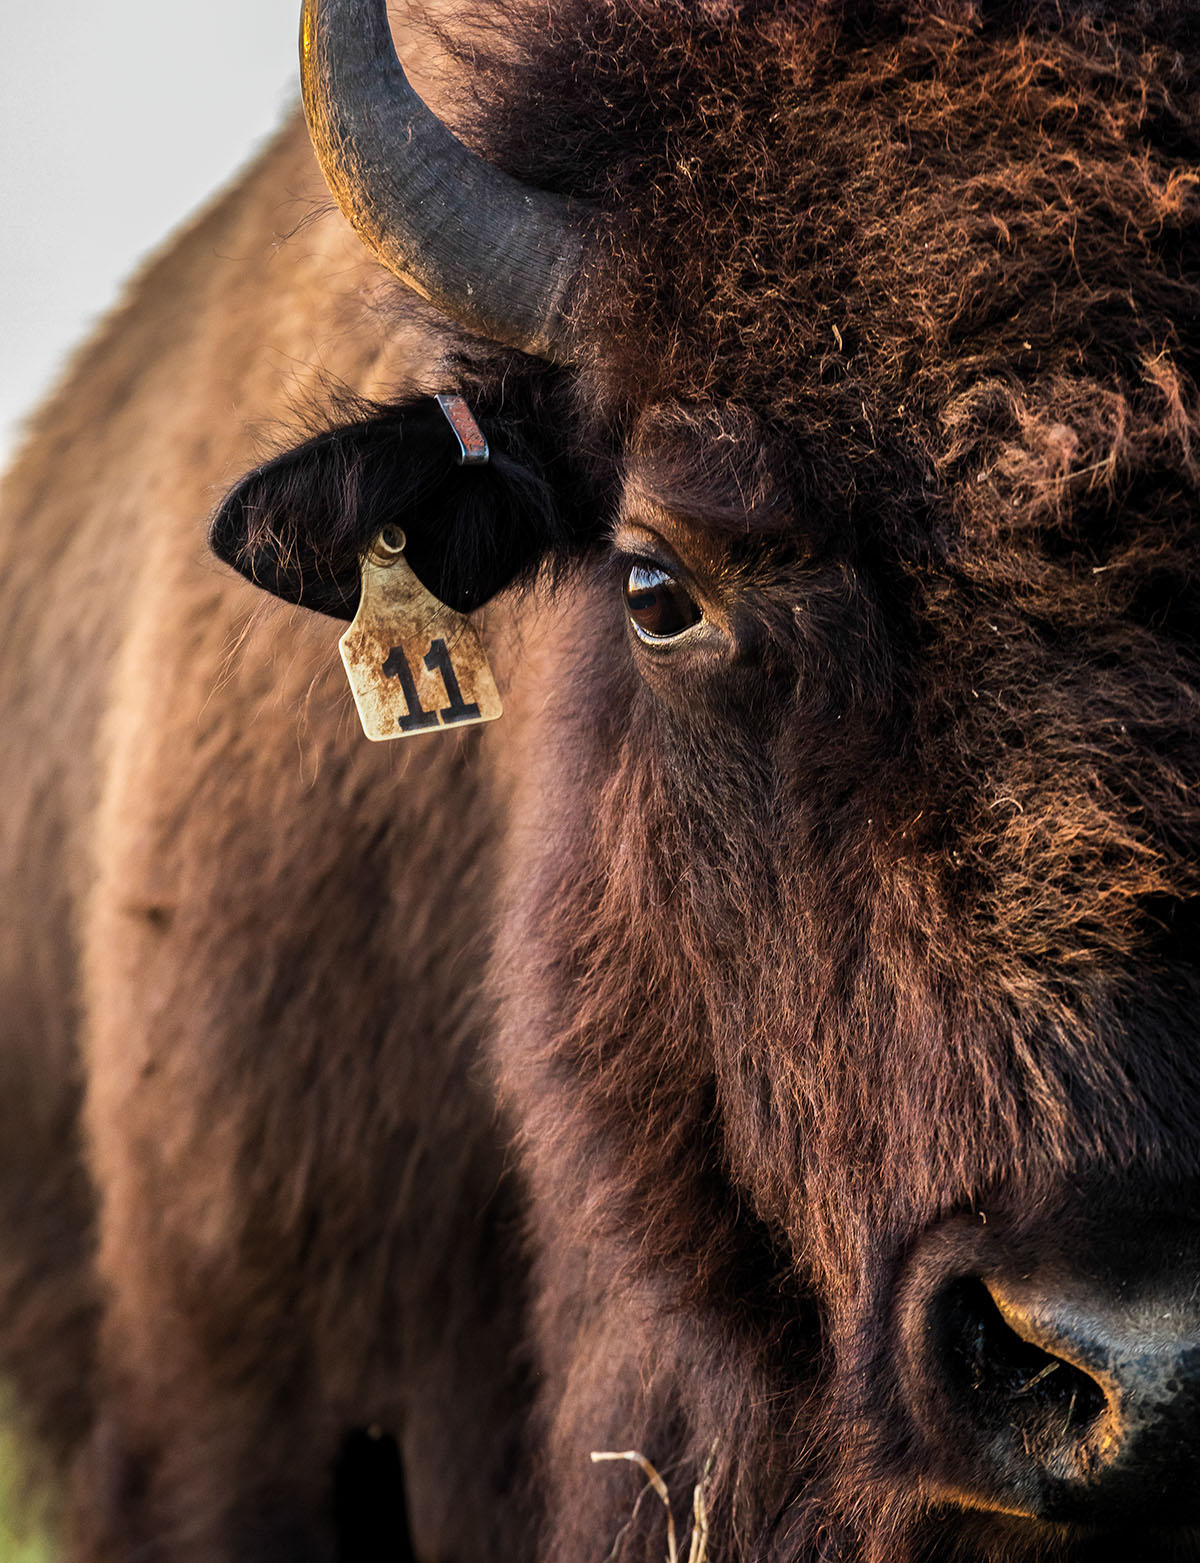 A close-up on the face of a bison